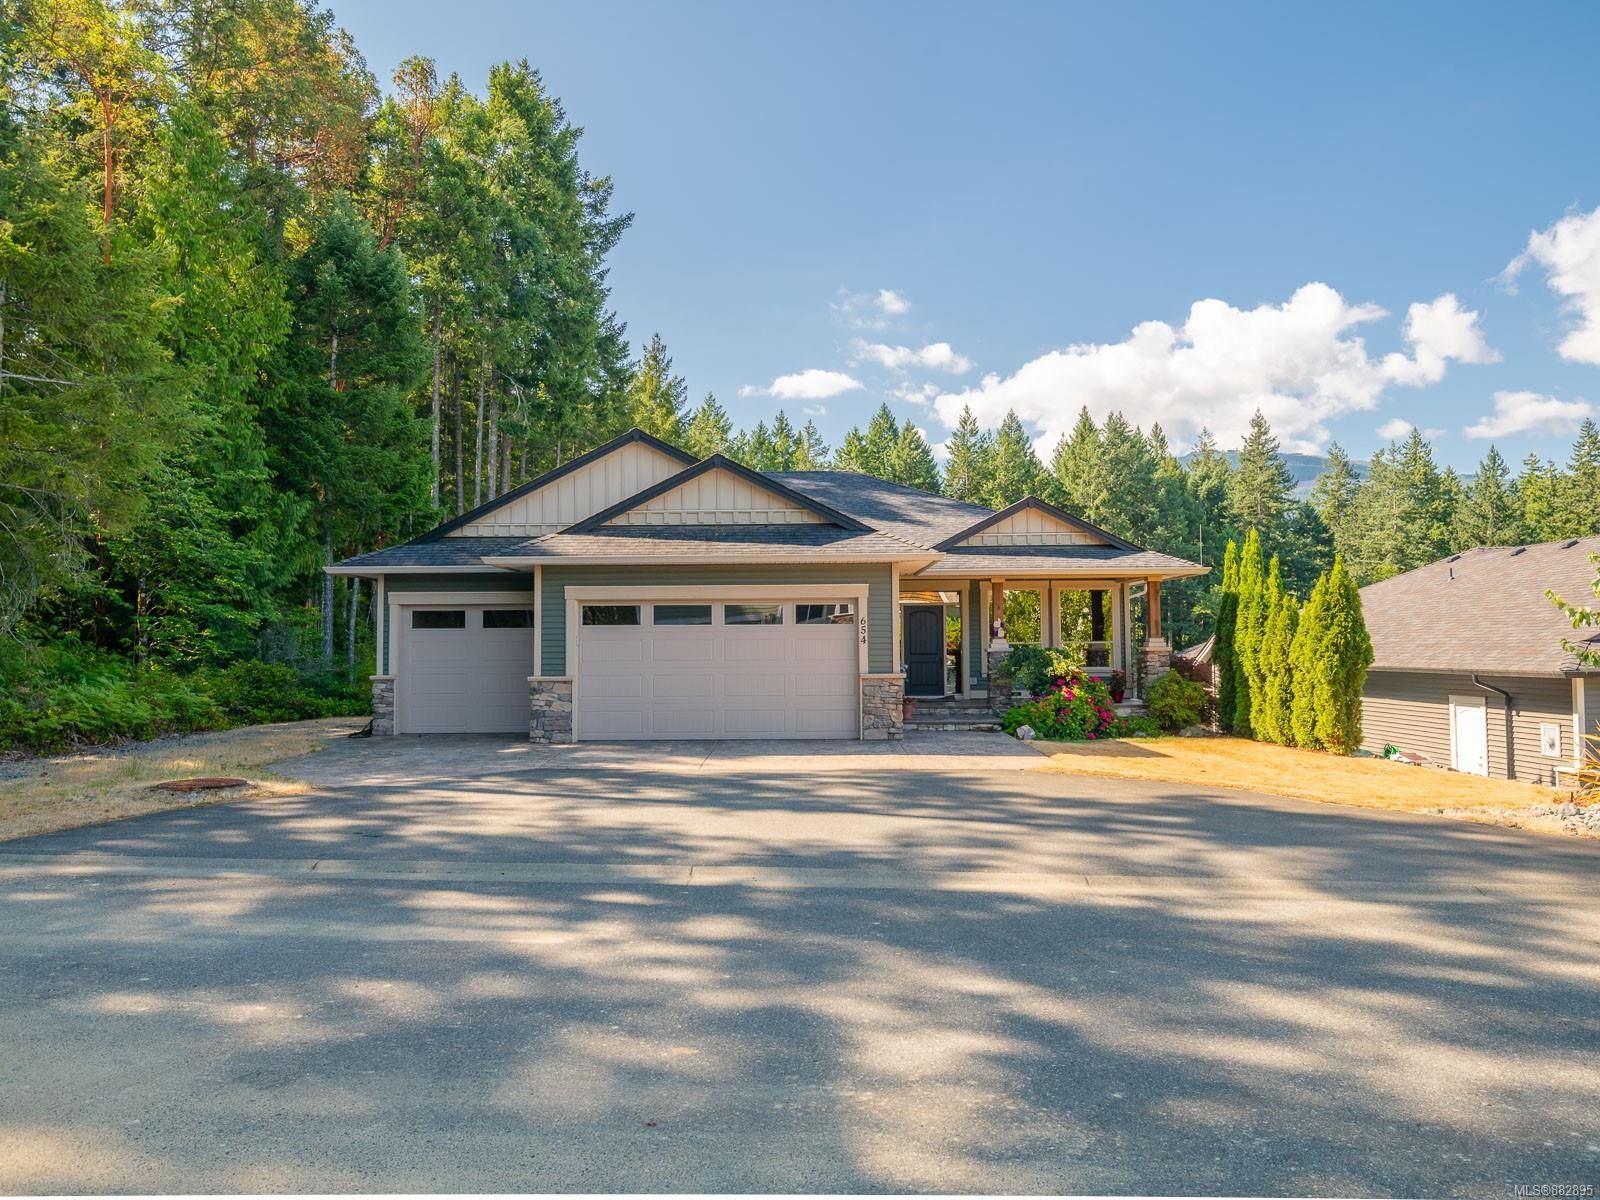 I have sold a property at 654 Sanderson Rd in Ladysmith
